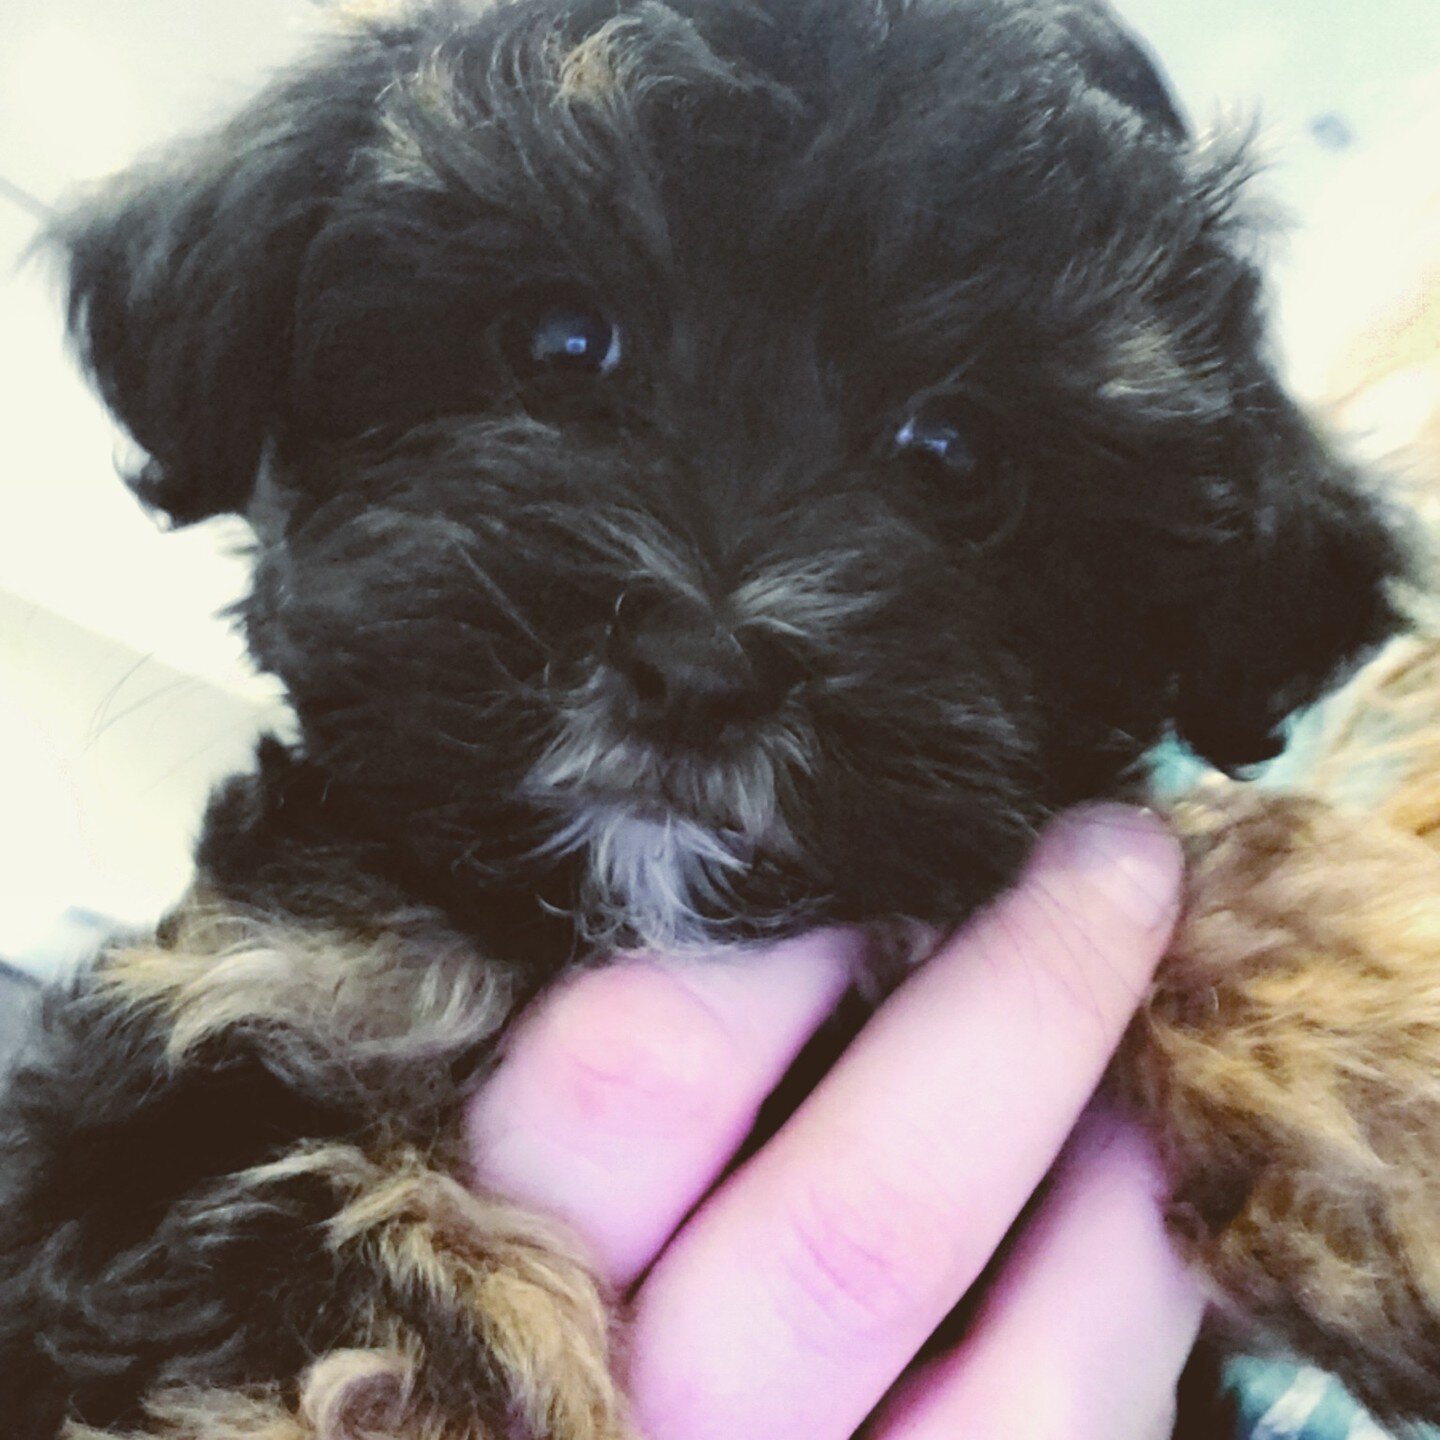 This little cutie is on his way to his fur-ever home! 🏡🐾

#goinghome #fureverhome #puppy #newfamilymember #cutenessoverload #maltipoo #maltese #poodle #maltipoodle #nicetomeetyou #maltipoosofinstagram #doodlesofinstagram #puppiesofinstagram #pup #f